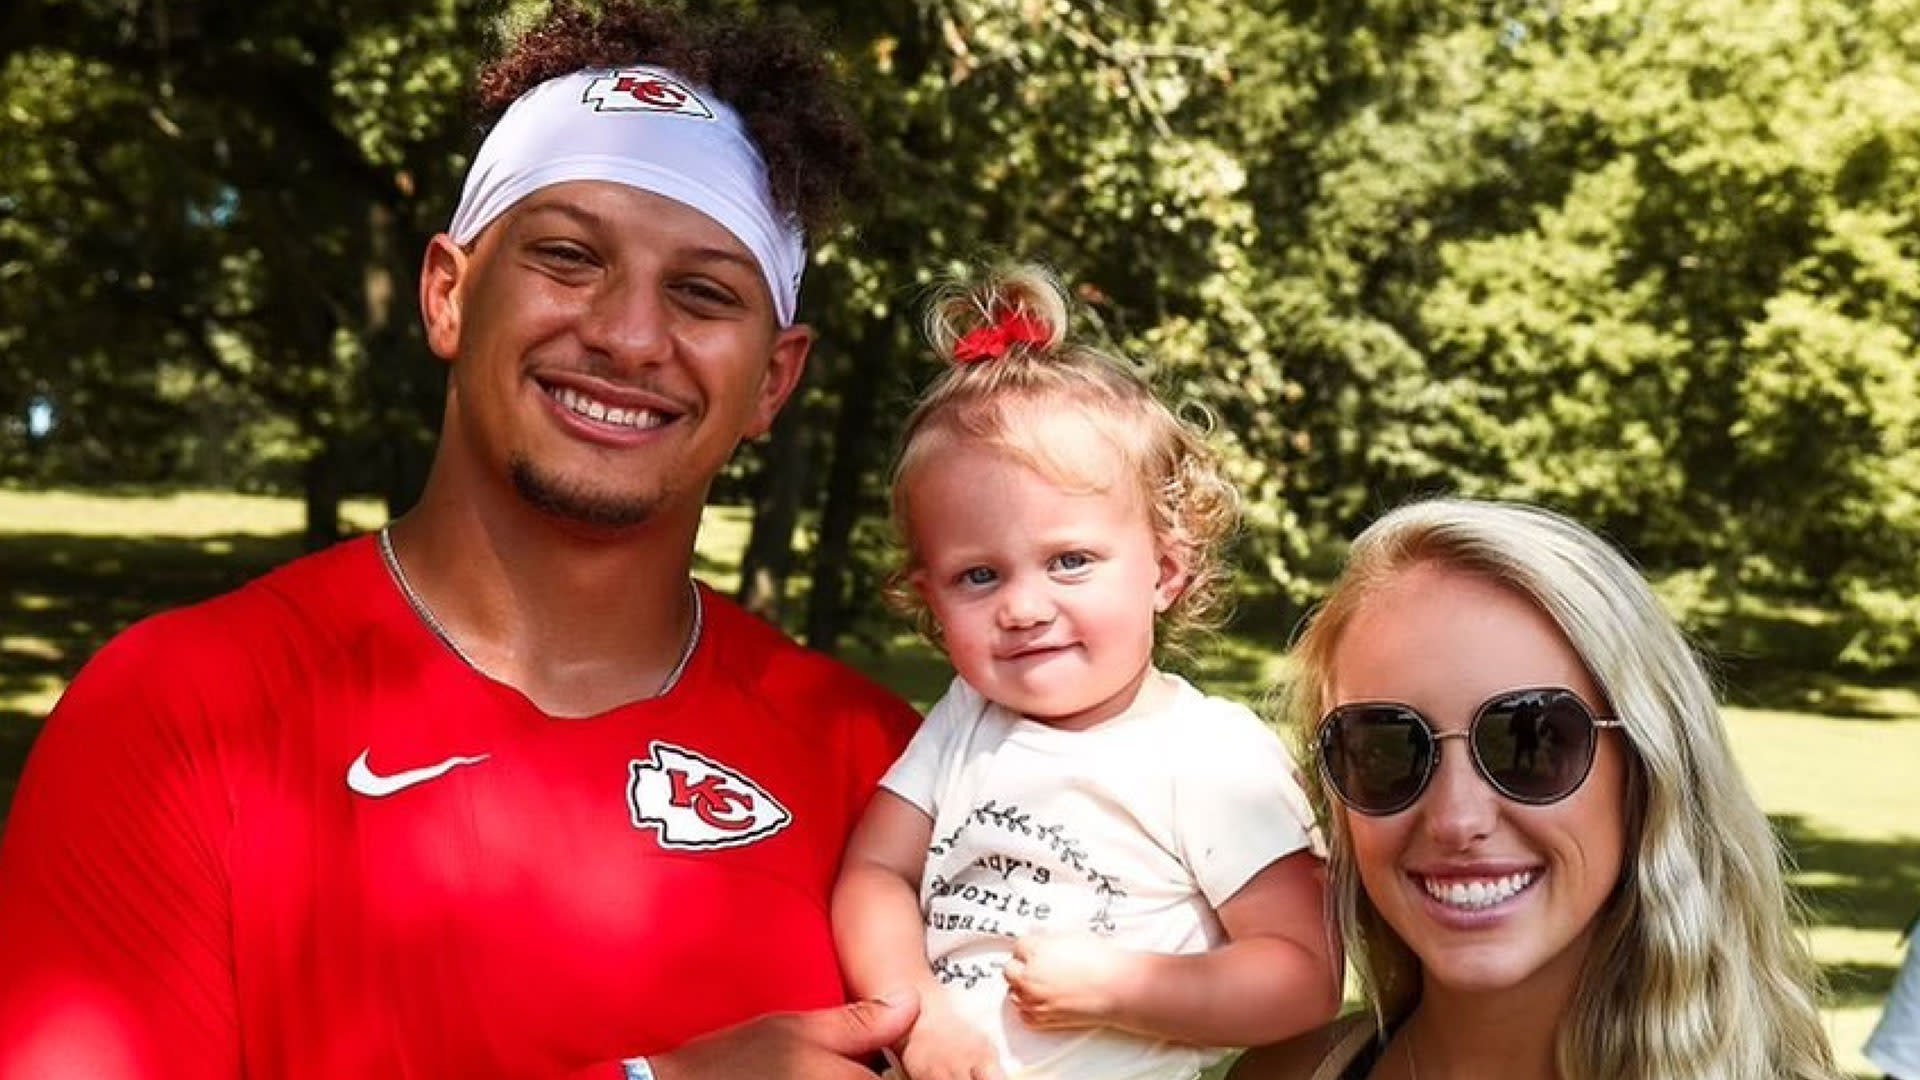 In Photos: Patrick Mahomes' daughter Sterling adorably models her father's  No. 15 KC Royals jersey